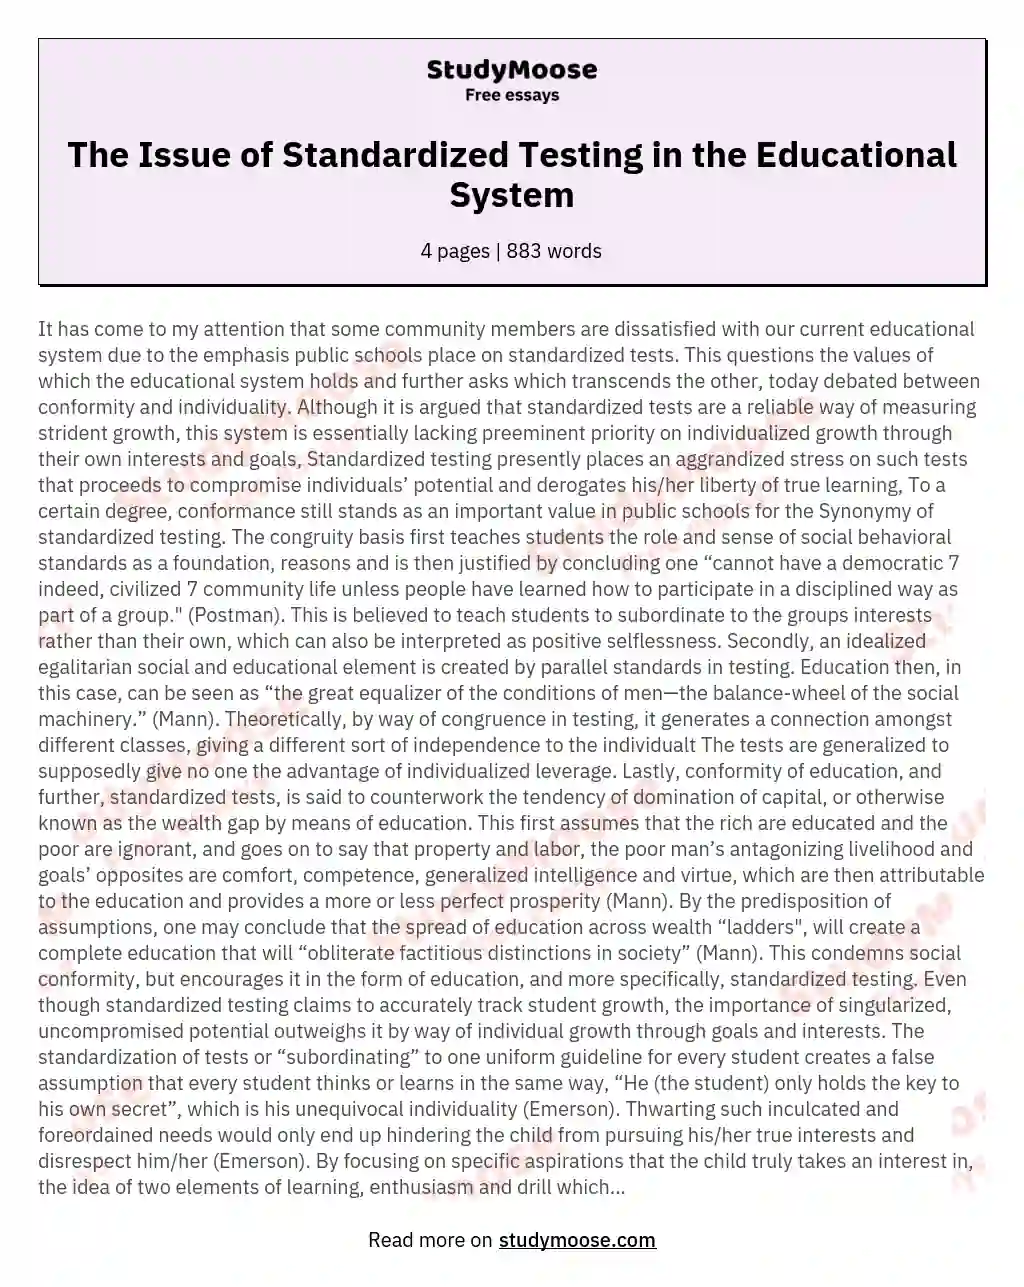 The Issue of Standardized Testing in the Educational System essay